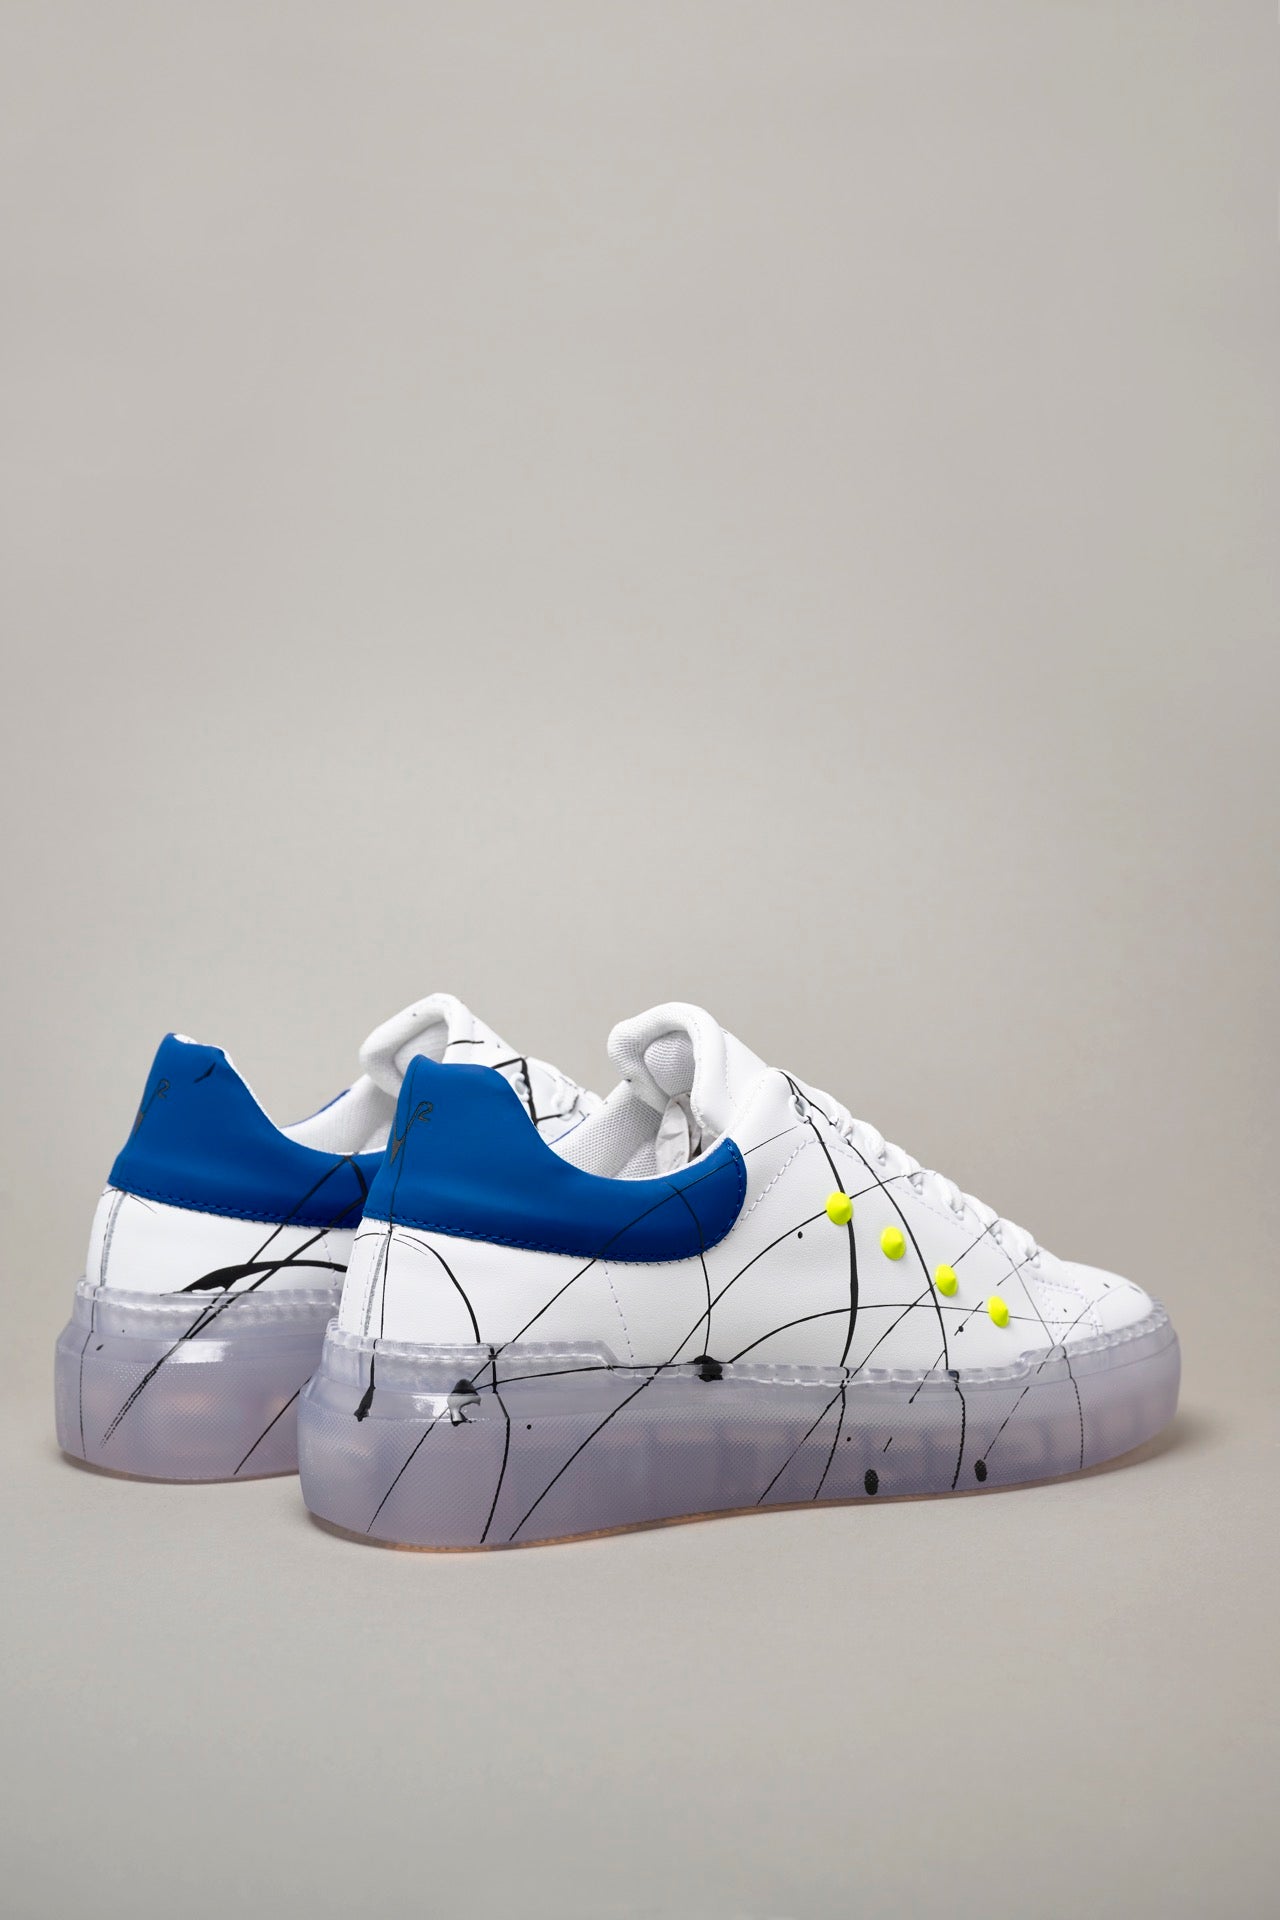 GALAXY - Sneakers with high transparent Royal Blue retro sole with Fluo Yellow studs and Paint splashes